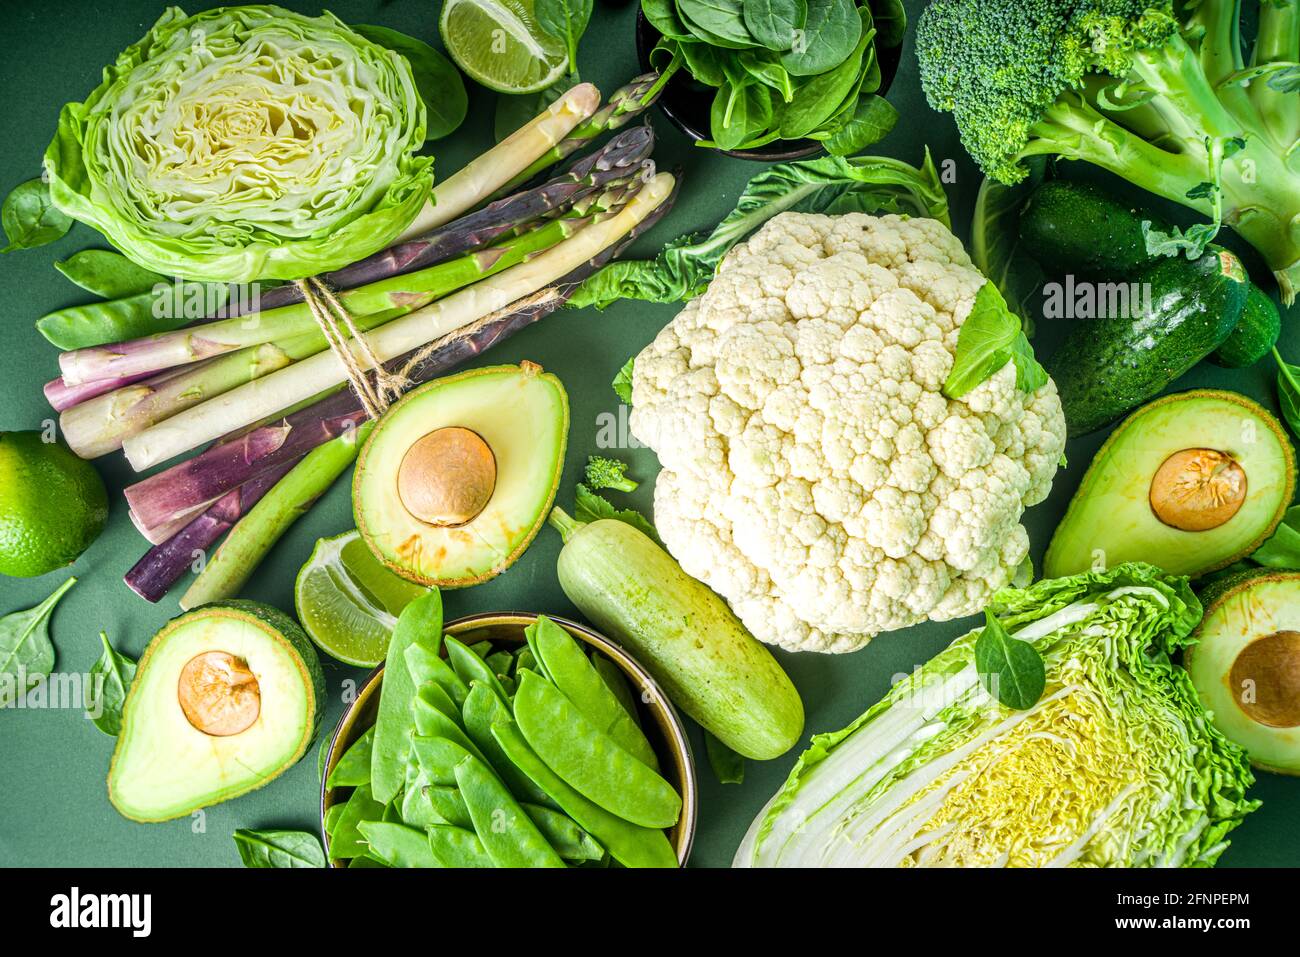 Healthy Diet Spring food background. Assortment of fresh raw organic green vegetables - broccoli, cauliflower, zucchini, cucumbers, asparagus, spinach Stock Photo